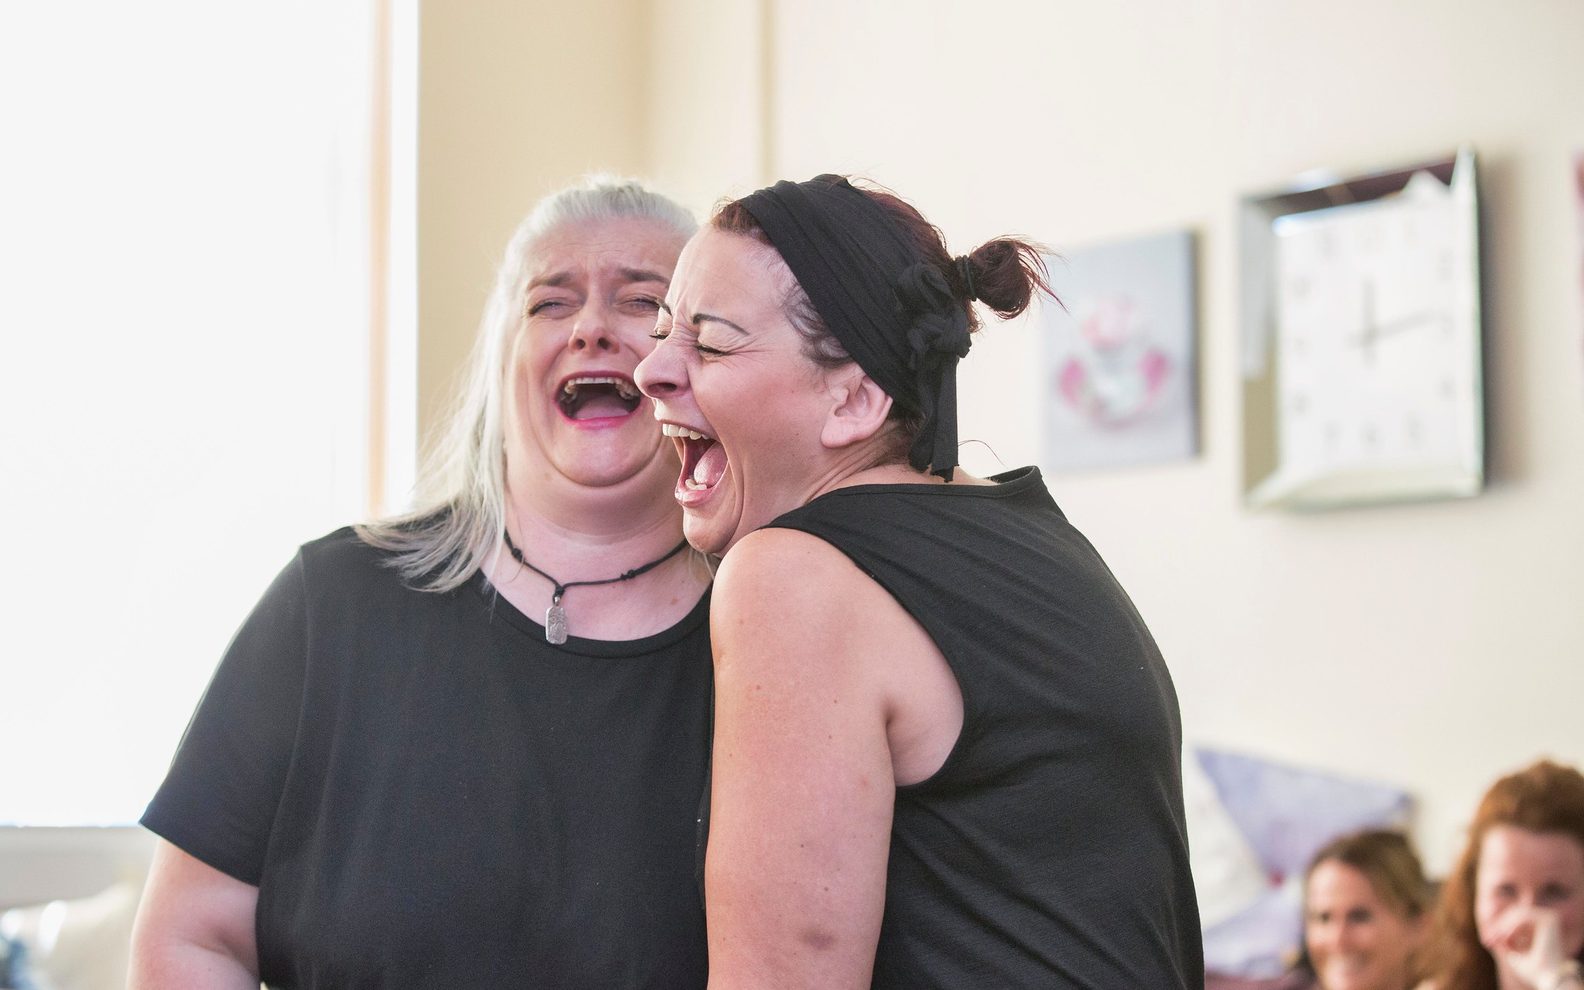 Two women laughing openly. They are both dressed in black and other women can be seen laughing in the background.